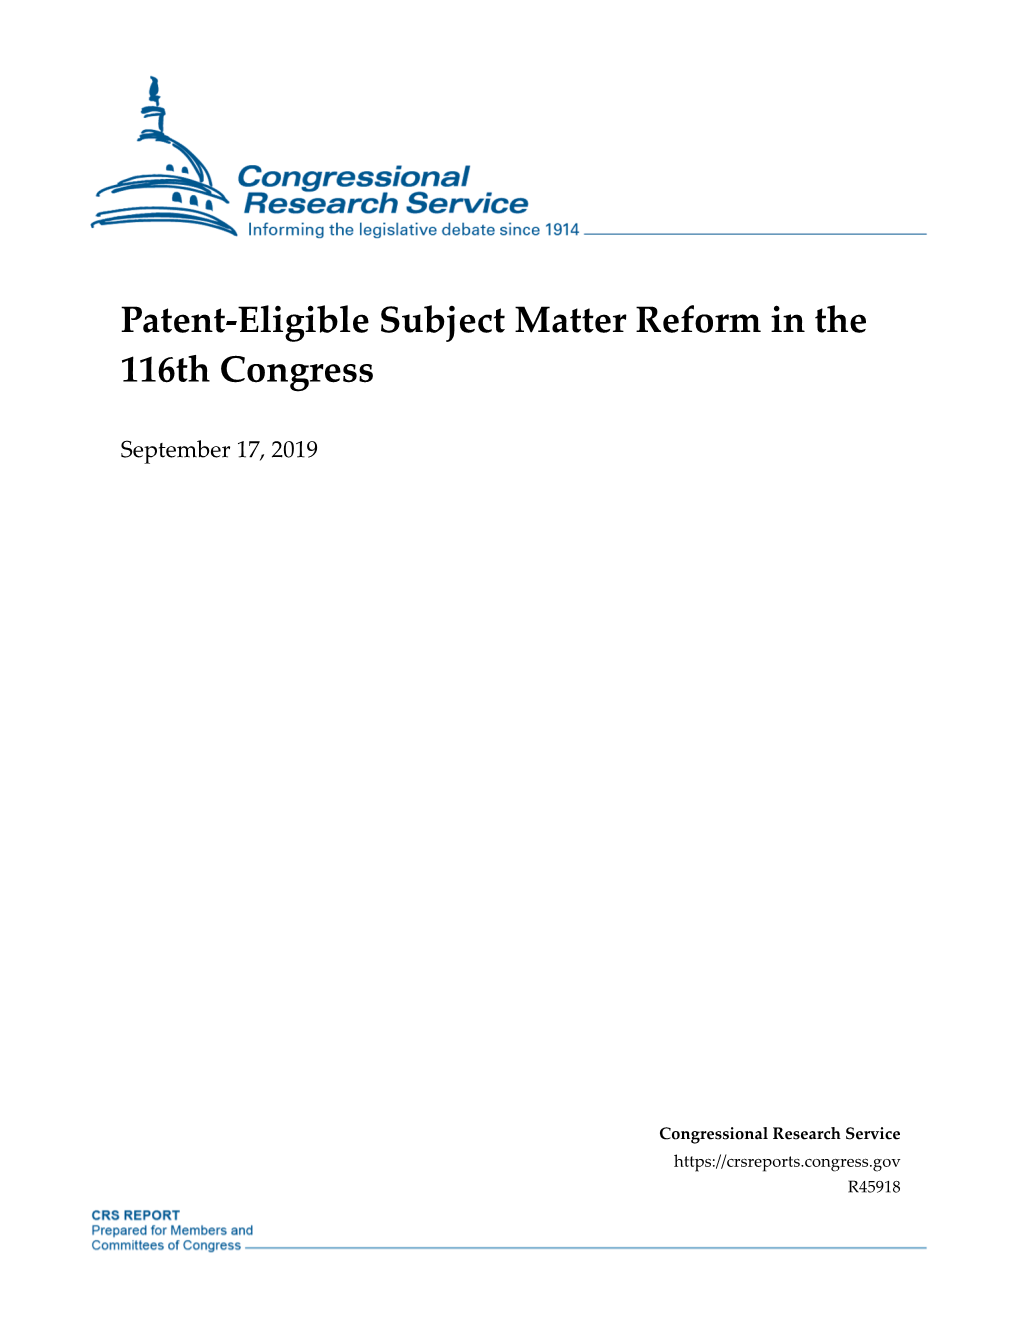 Patent-Eligible Subject Matter Reform in the 116Th Congress